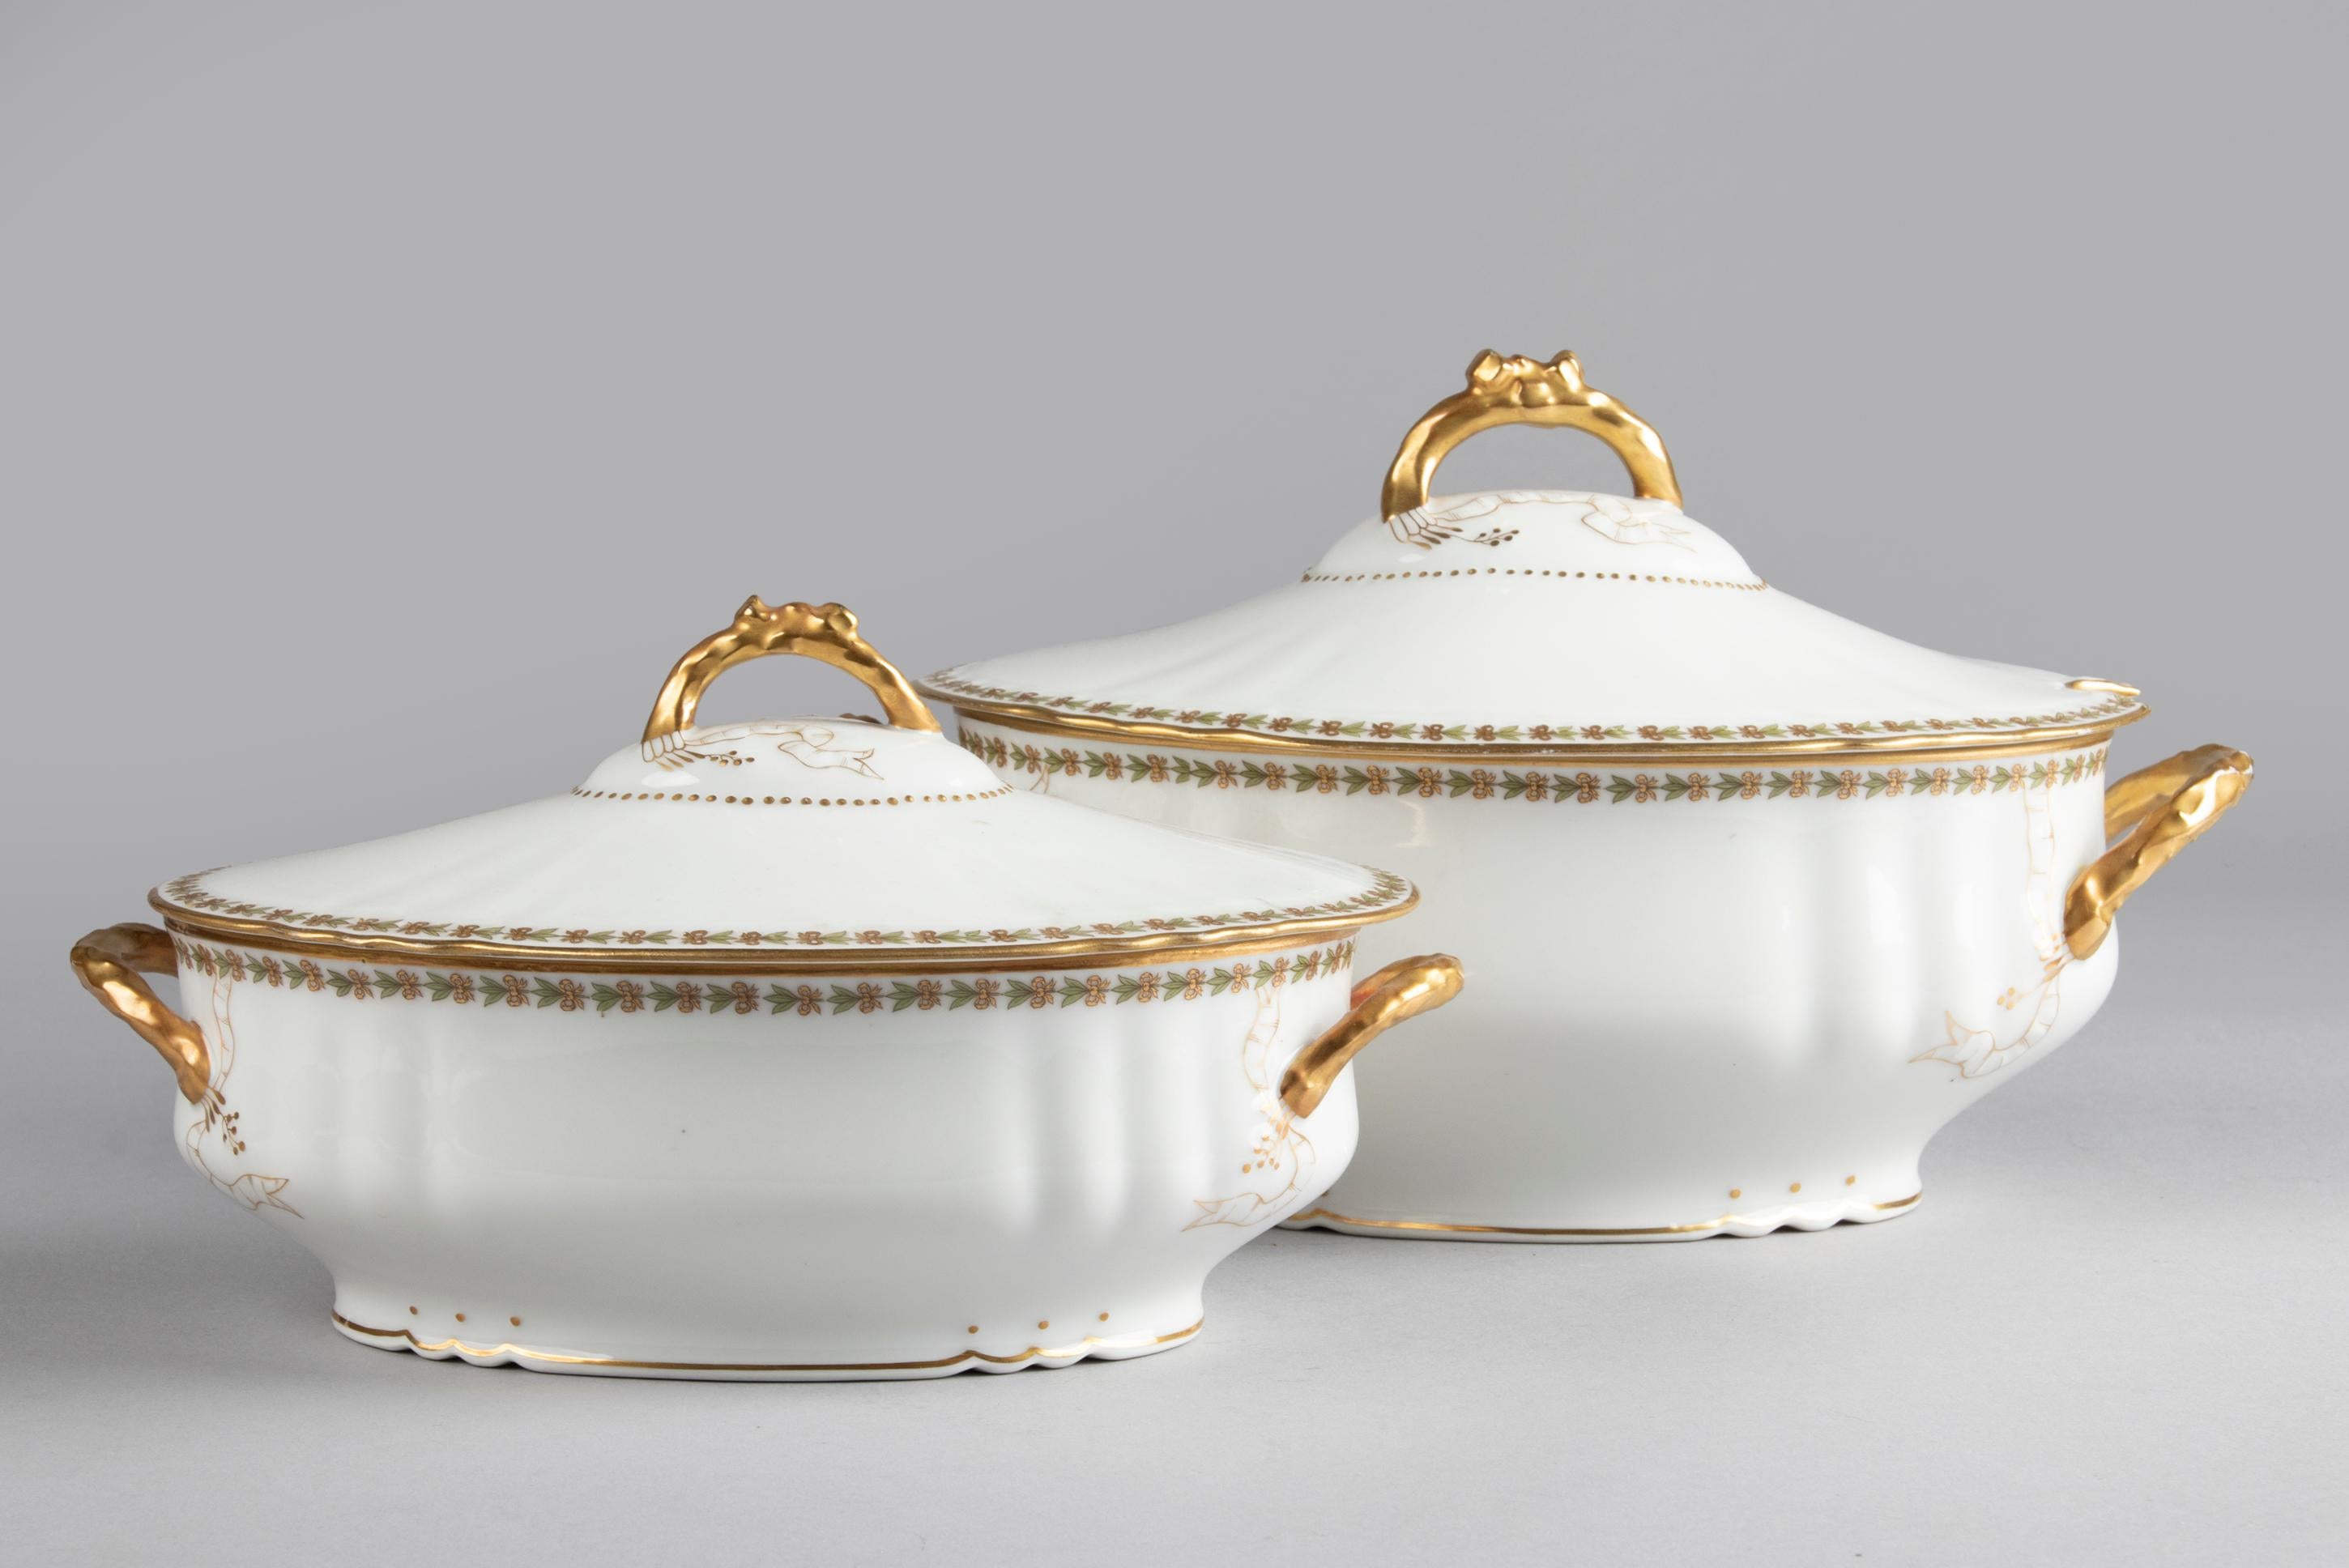 21-Piece Early 20th Century Porcelain Dinner Set Made by Limoges 3